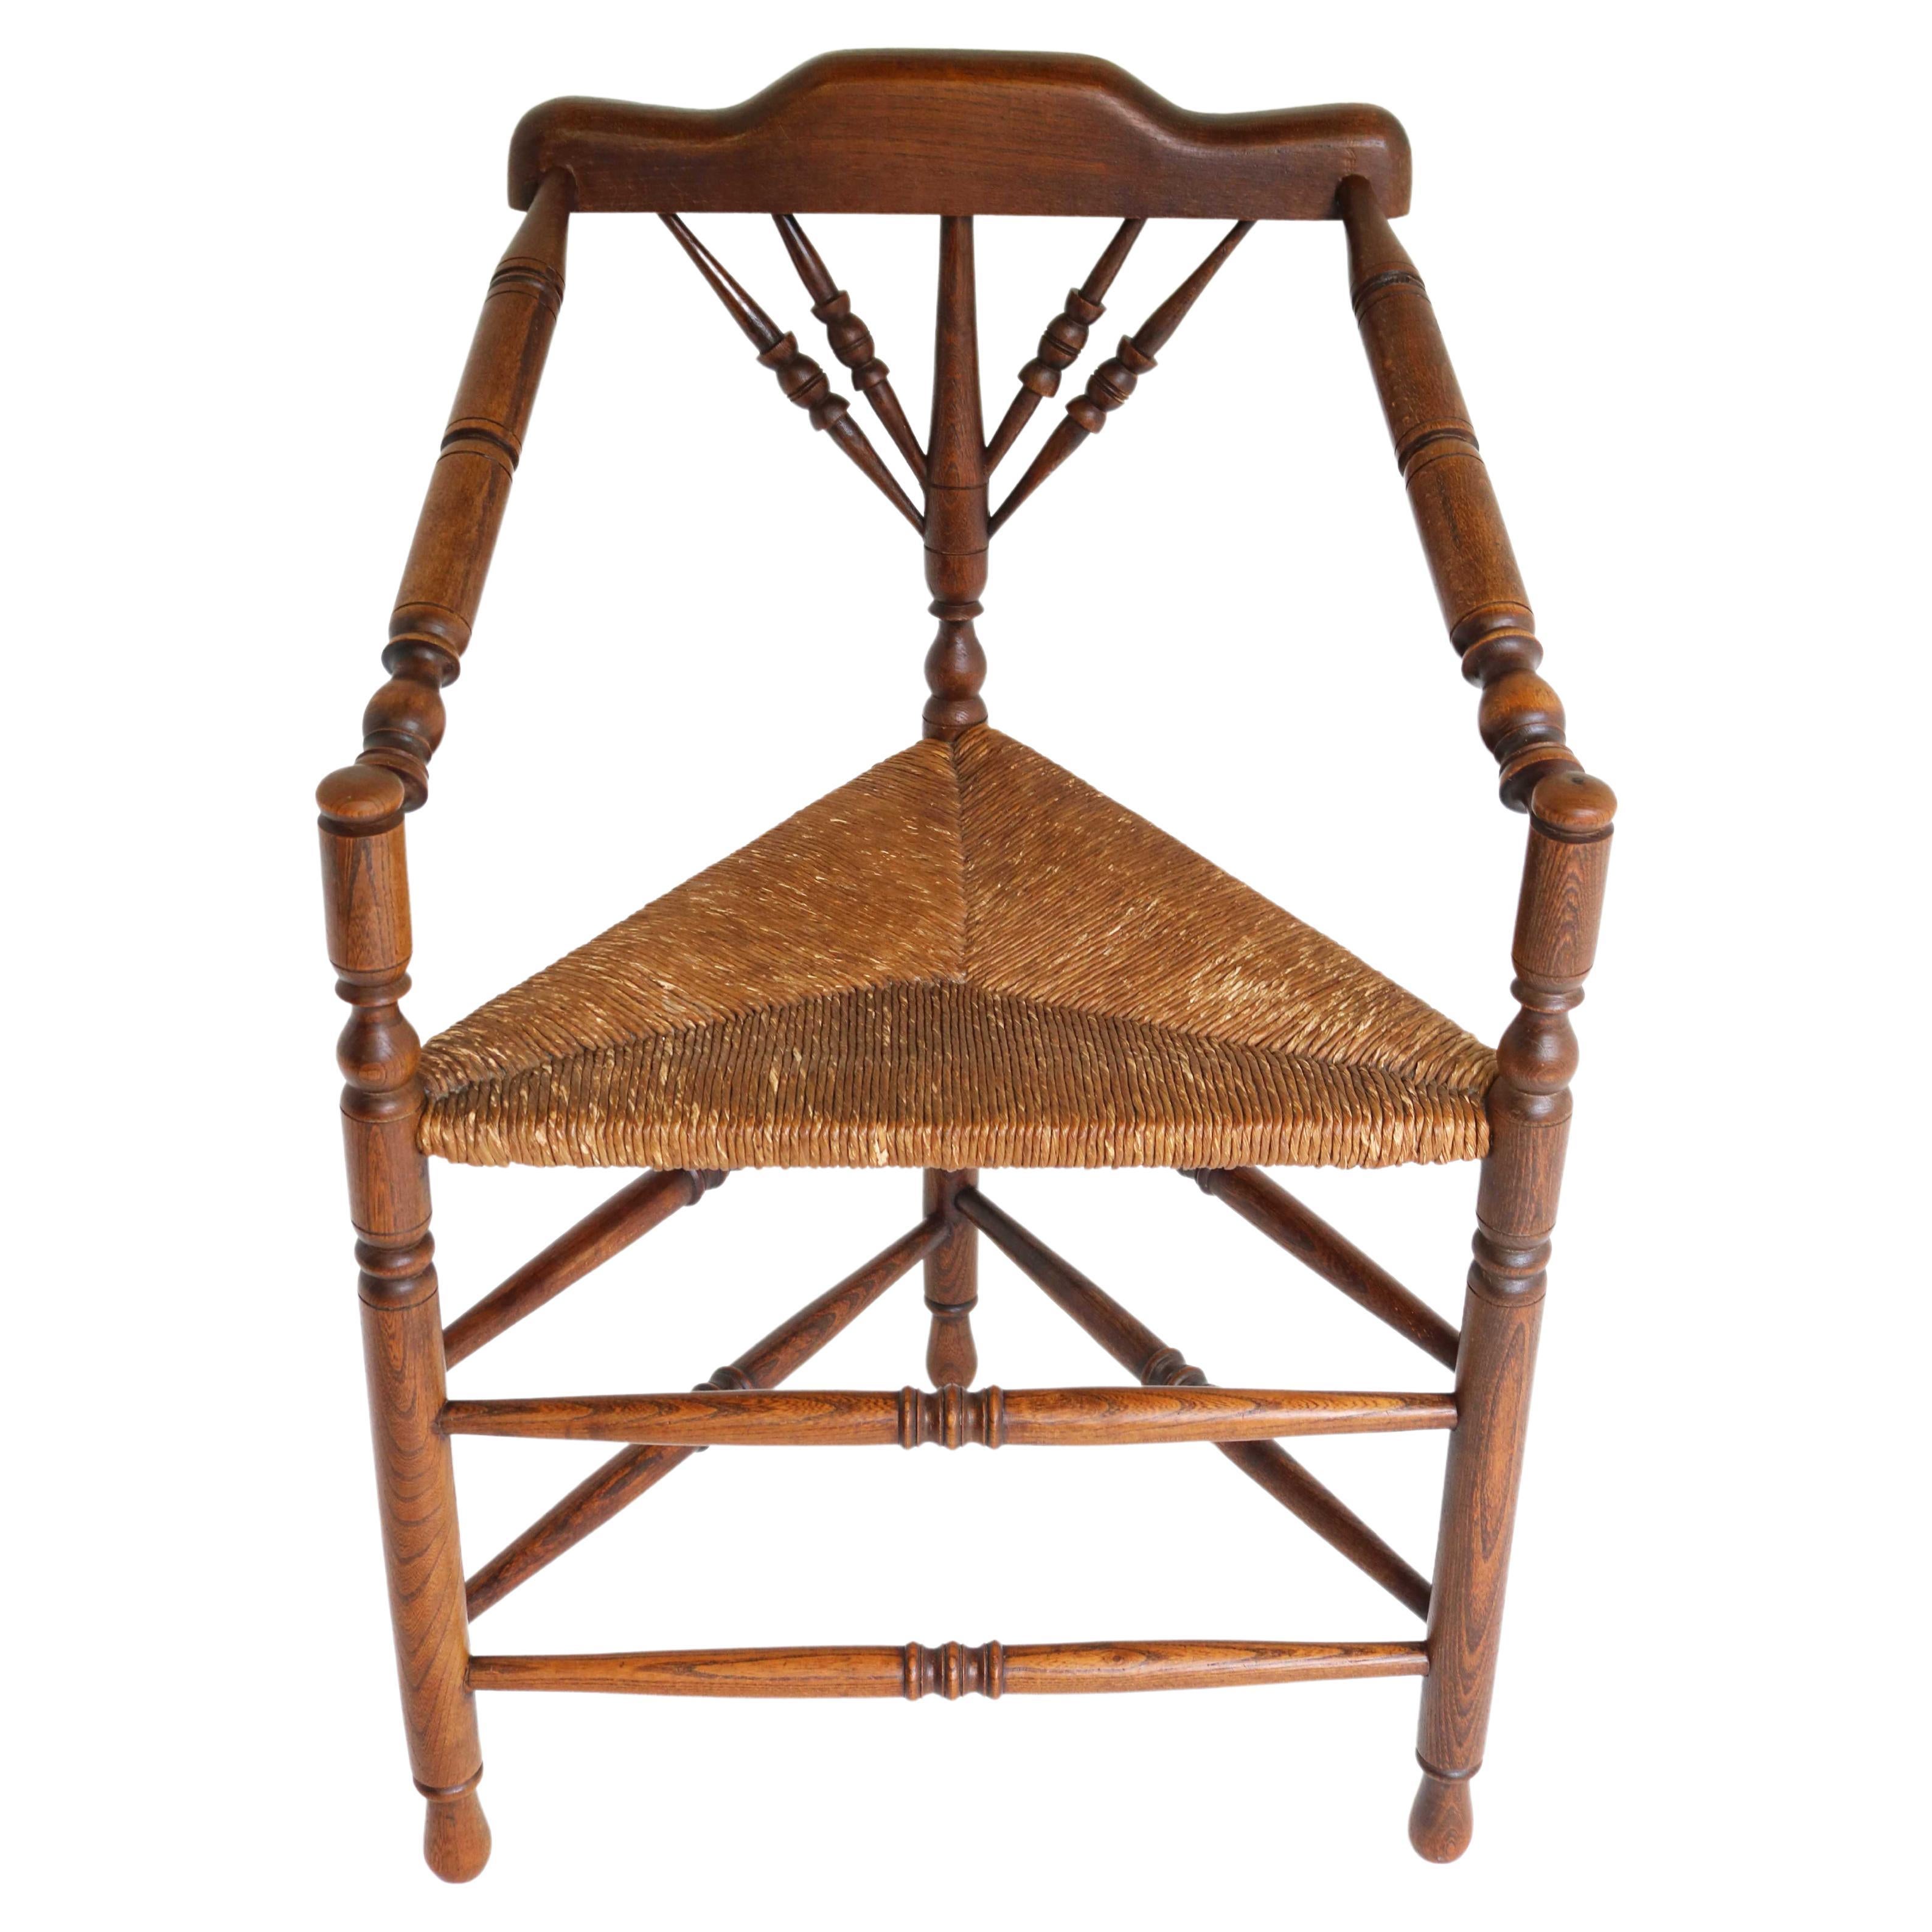 Antique Edwardian Style Triangular Corner Chair Rush Seat Knitting Armchair 1900 For Sale